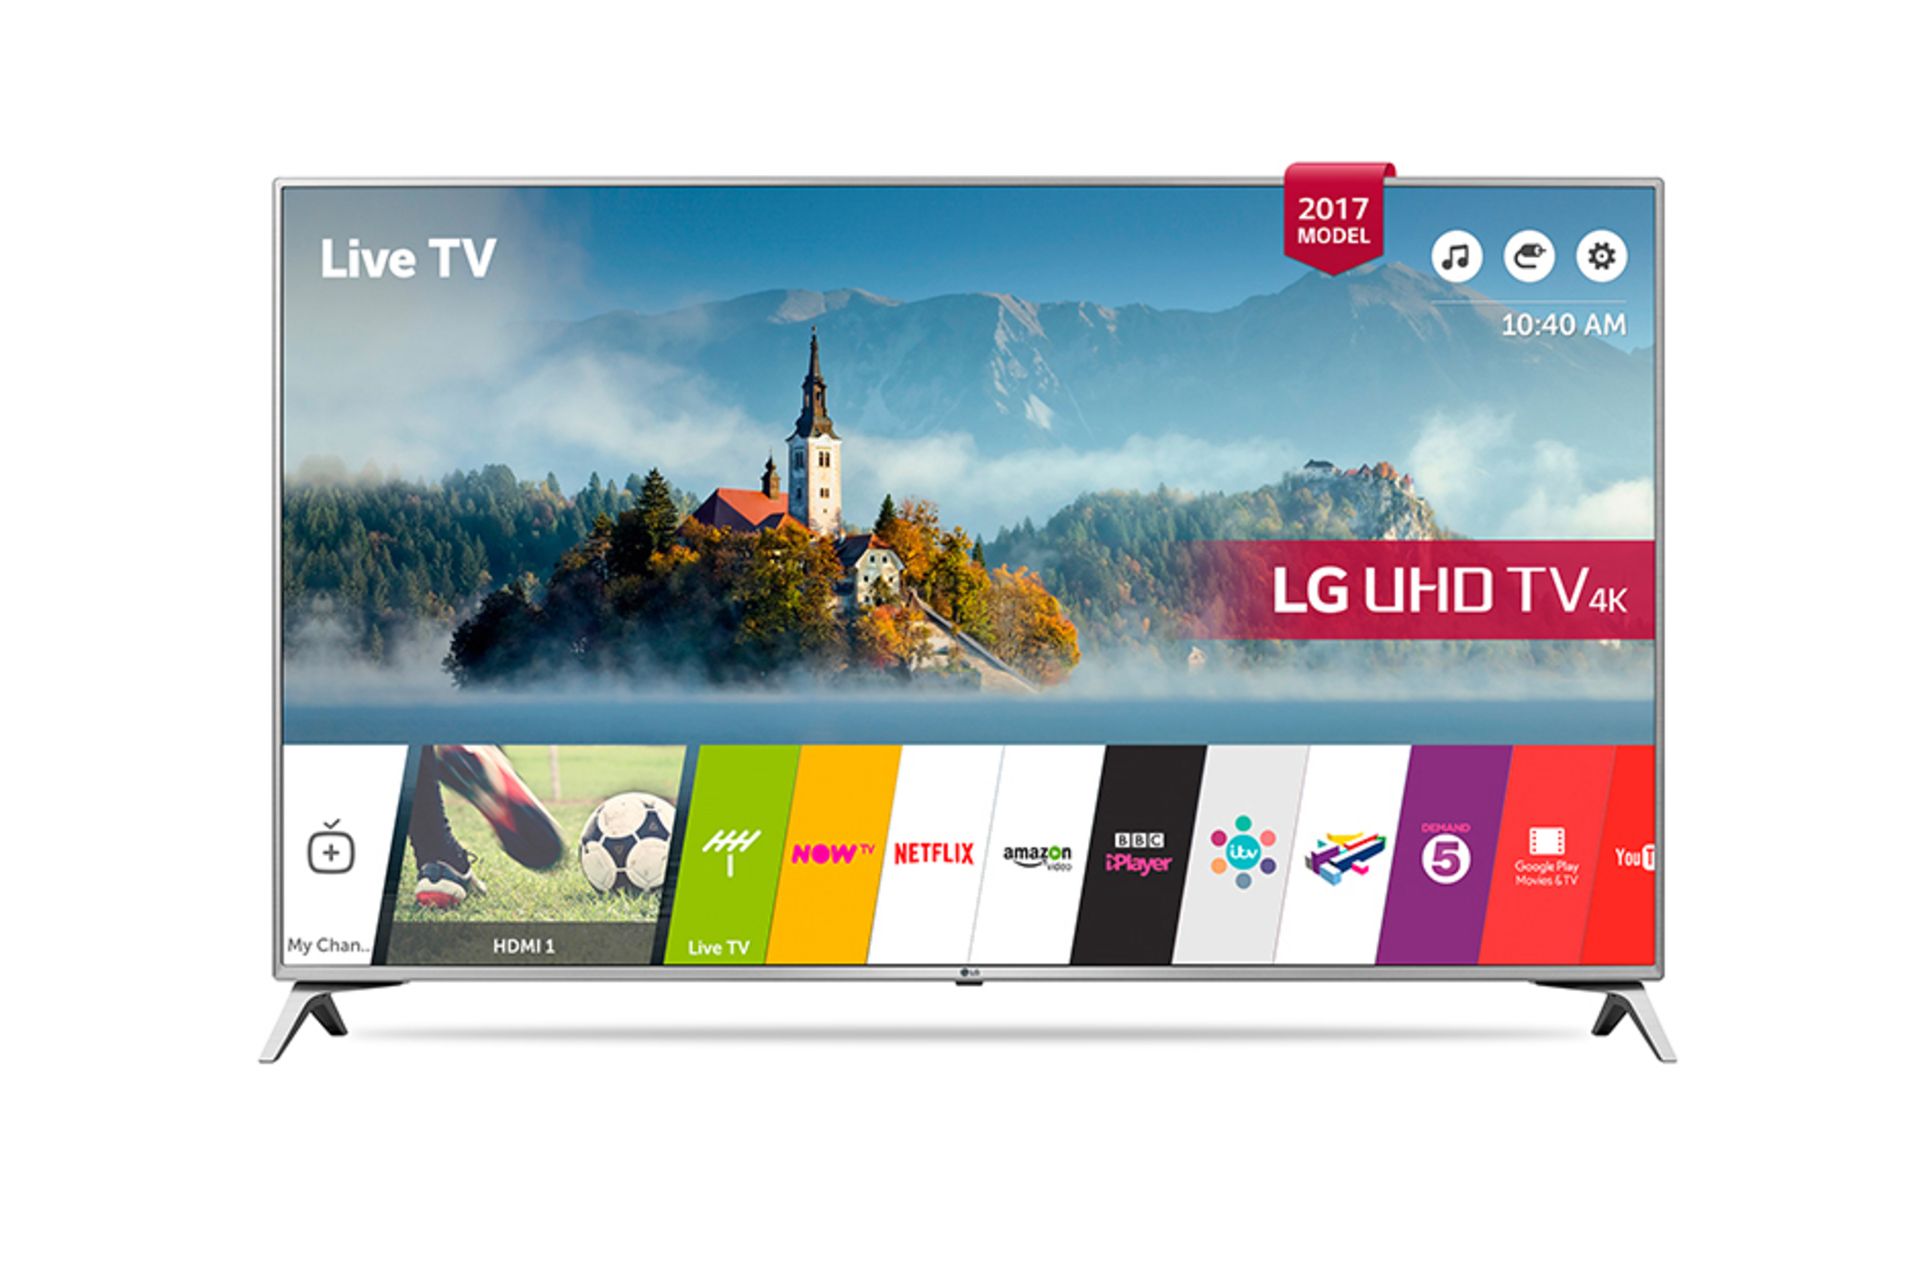 V Grade A LG 49 inch ACTIVE HDR 4K ULTRA HD LED SMART TV WITH FREEVIEW HD & WEBOS 3.5 & WIFI